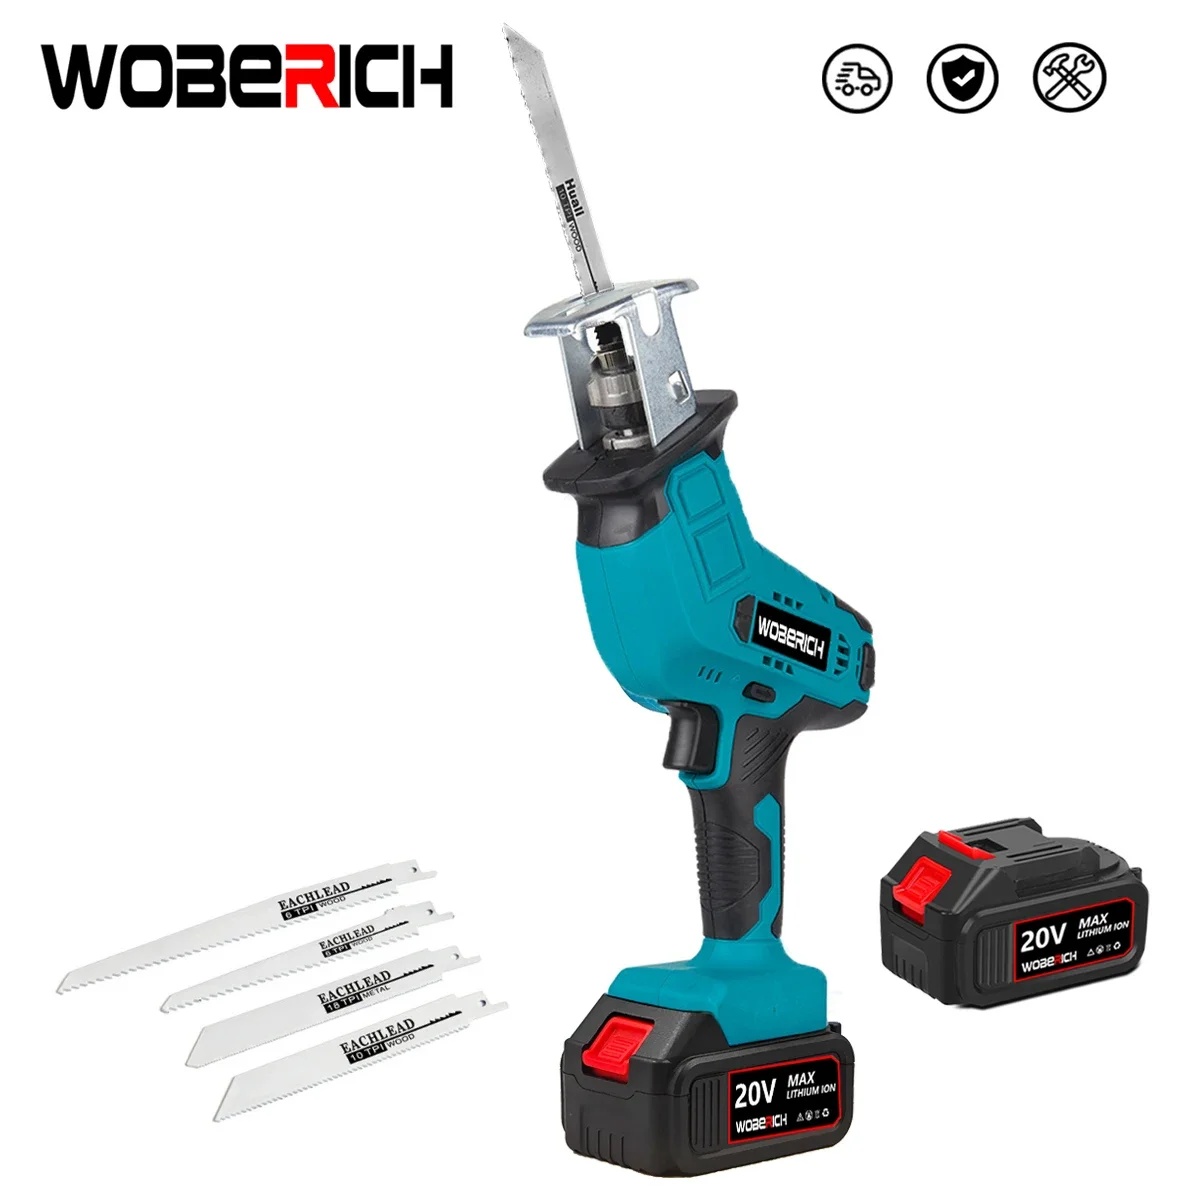 Cordless Reciprocating Saw 18V Adjustable Speed Electric Saw Wood Metal PVC Pipe Cutting fit Makita 18v Battery By WOBERICH electric goddess cordless reciprocating saw 18v adjustable speed electric saw wood metal pipe cutting for dewalt 20v battery